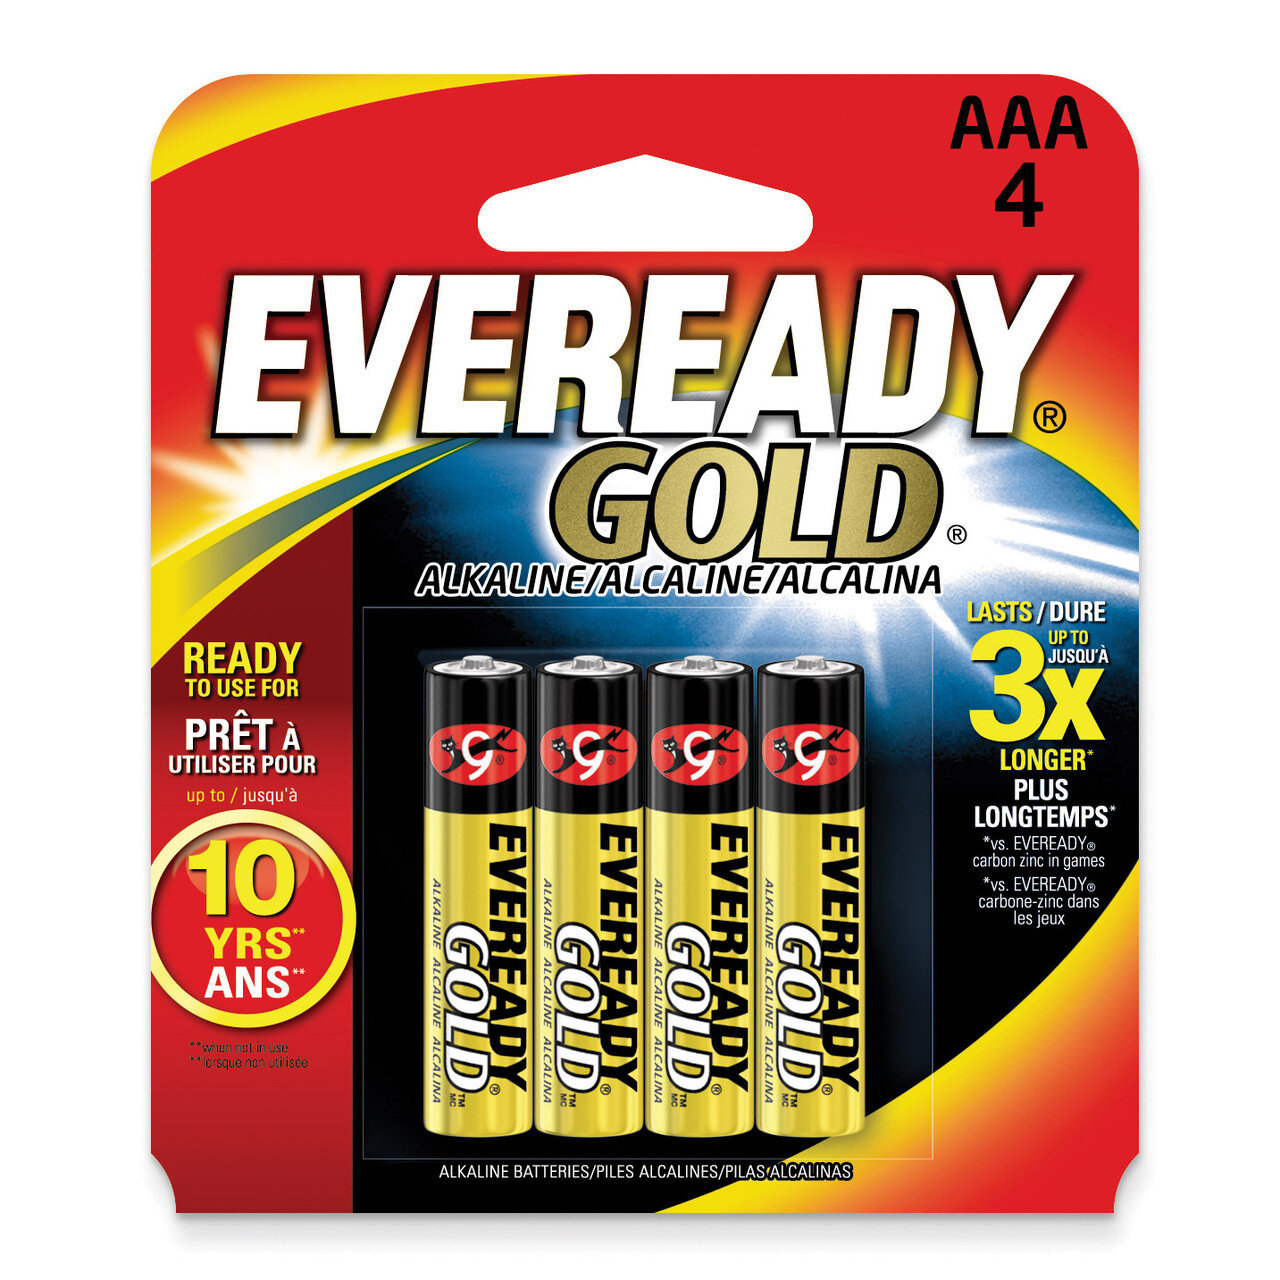 (4) Pack of Eveready Gold ABatteries WBAAA